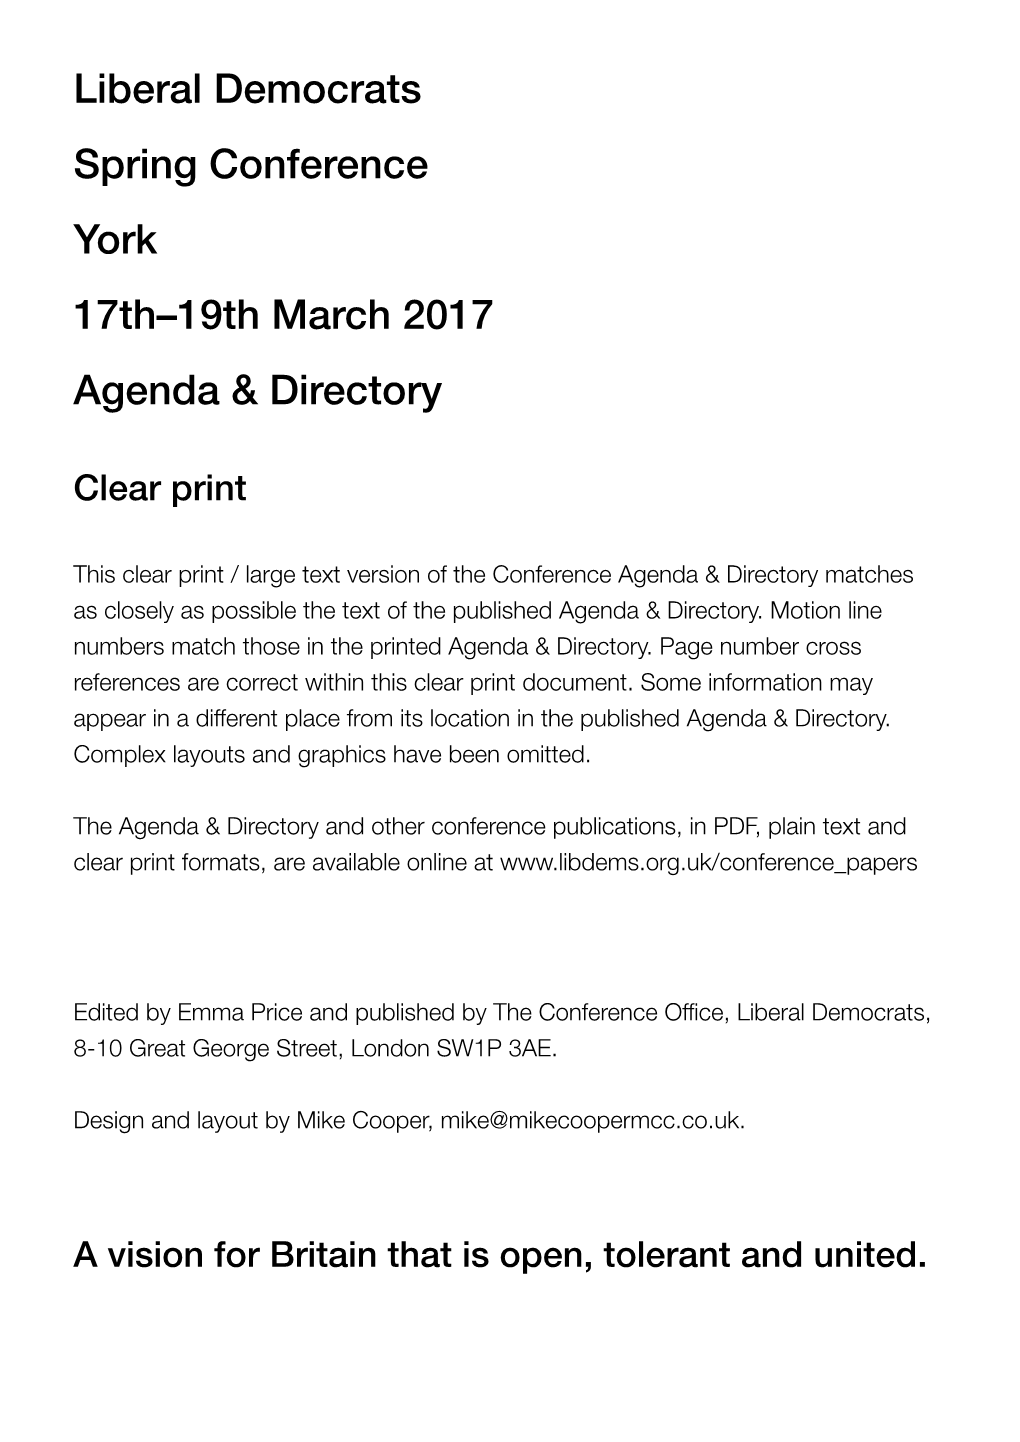 Liberal Democrats Spring Conference York 17Th–19Th March 2017 Agenda & Directory